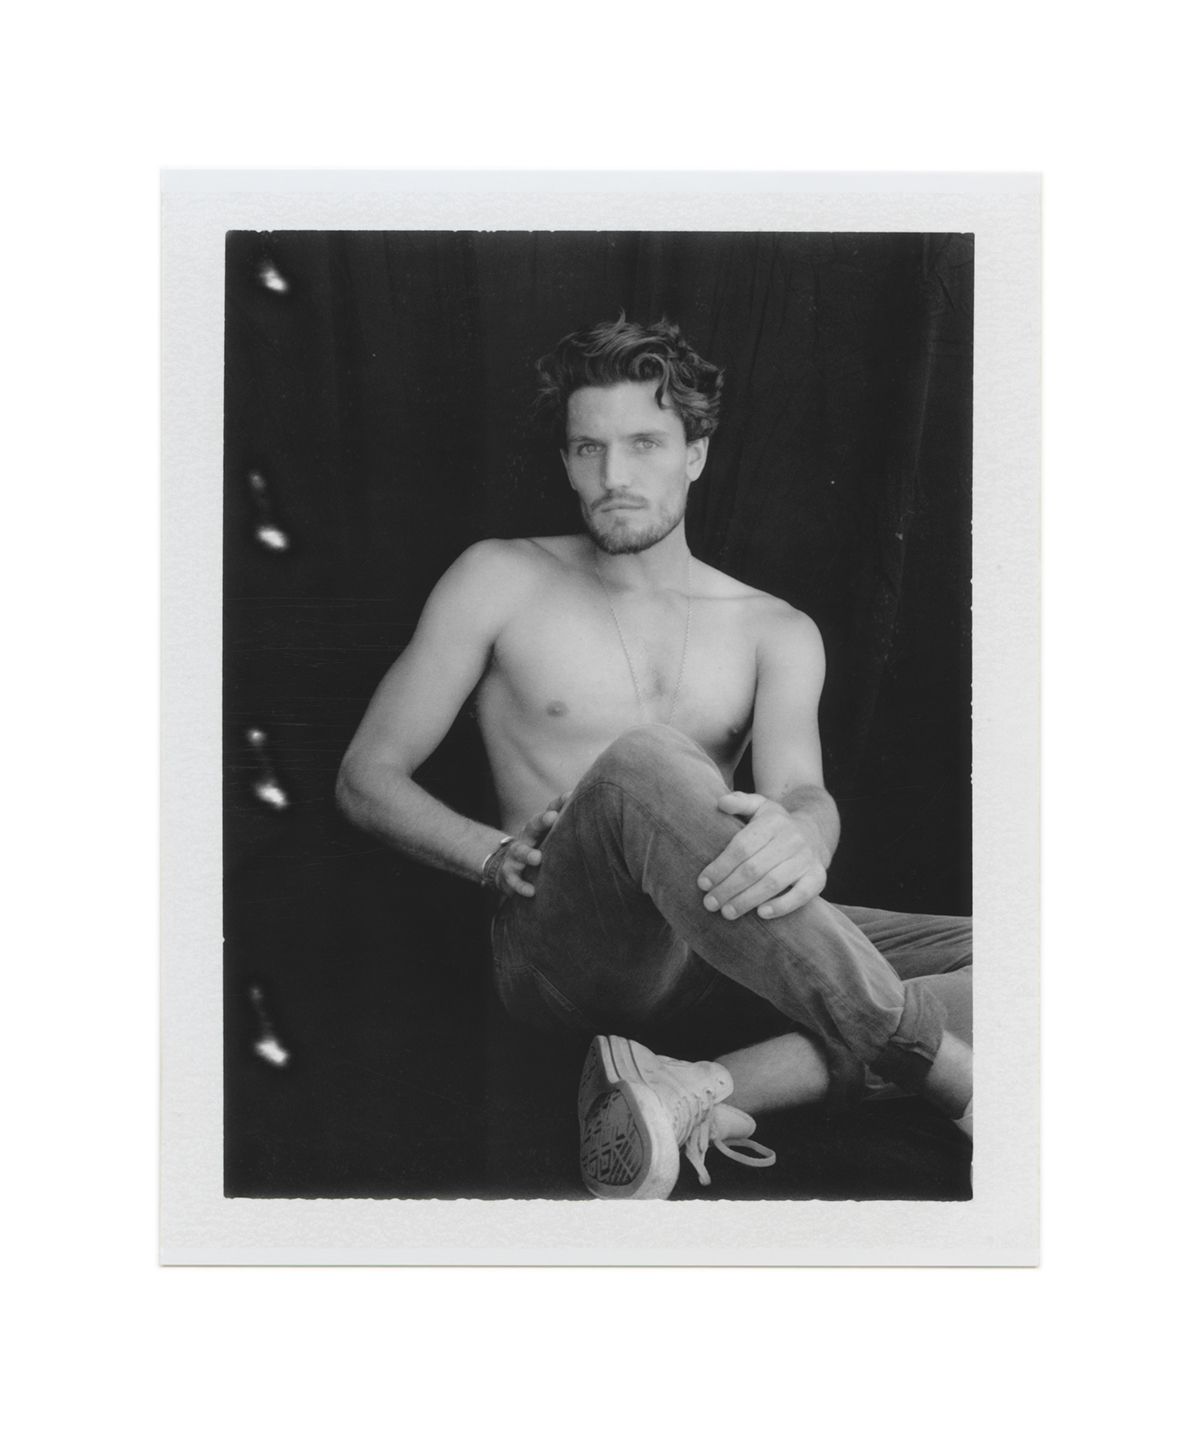 benjo arwas Next Models male modes editorial casting the fashionisto film is not dead large format black and white beauty portraits Los Angeles models Polaroids